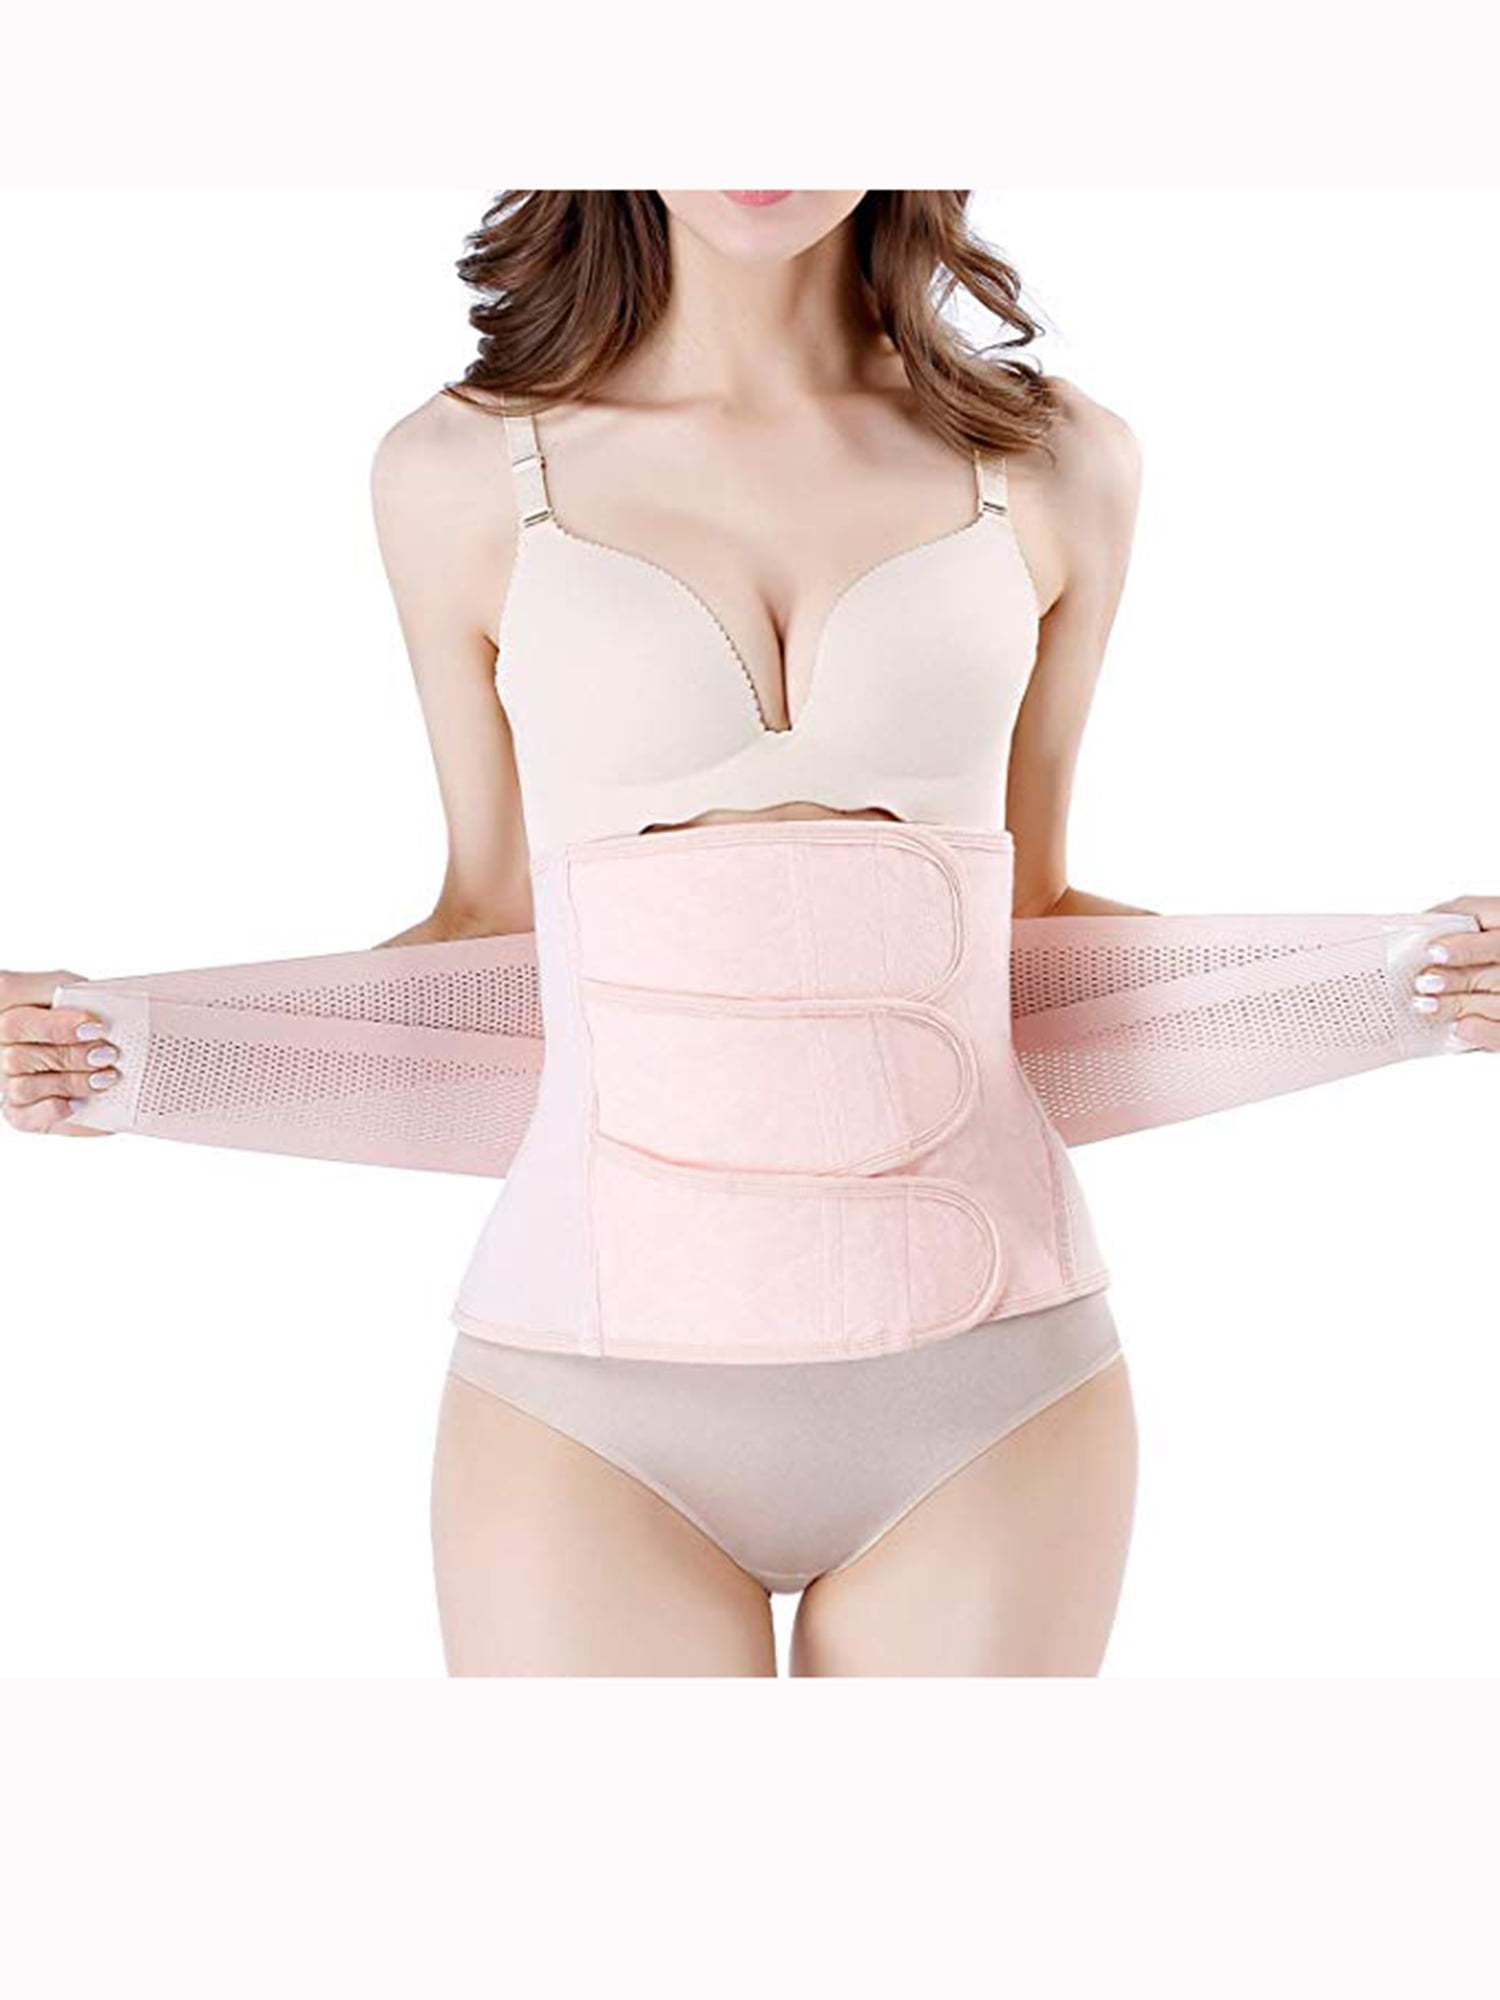 Postpartum Belly Wrap Recovery Support Shapewear Girdle After Birth Body Shaper 